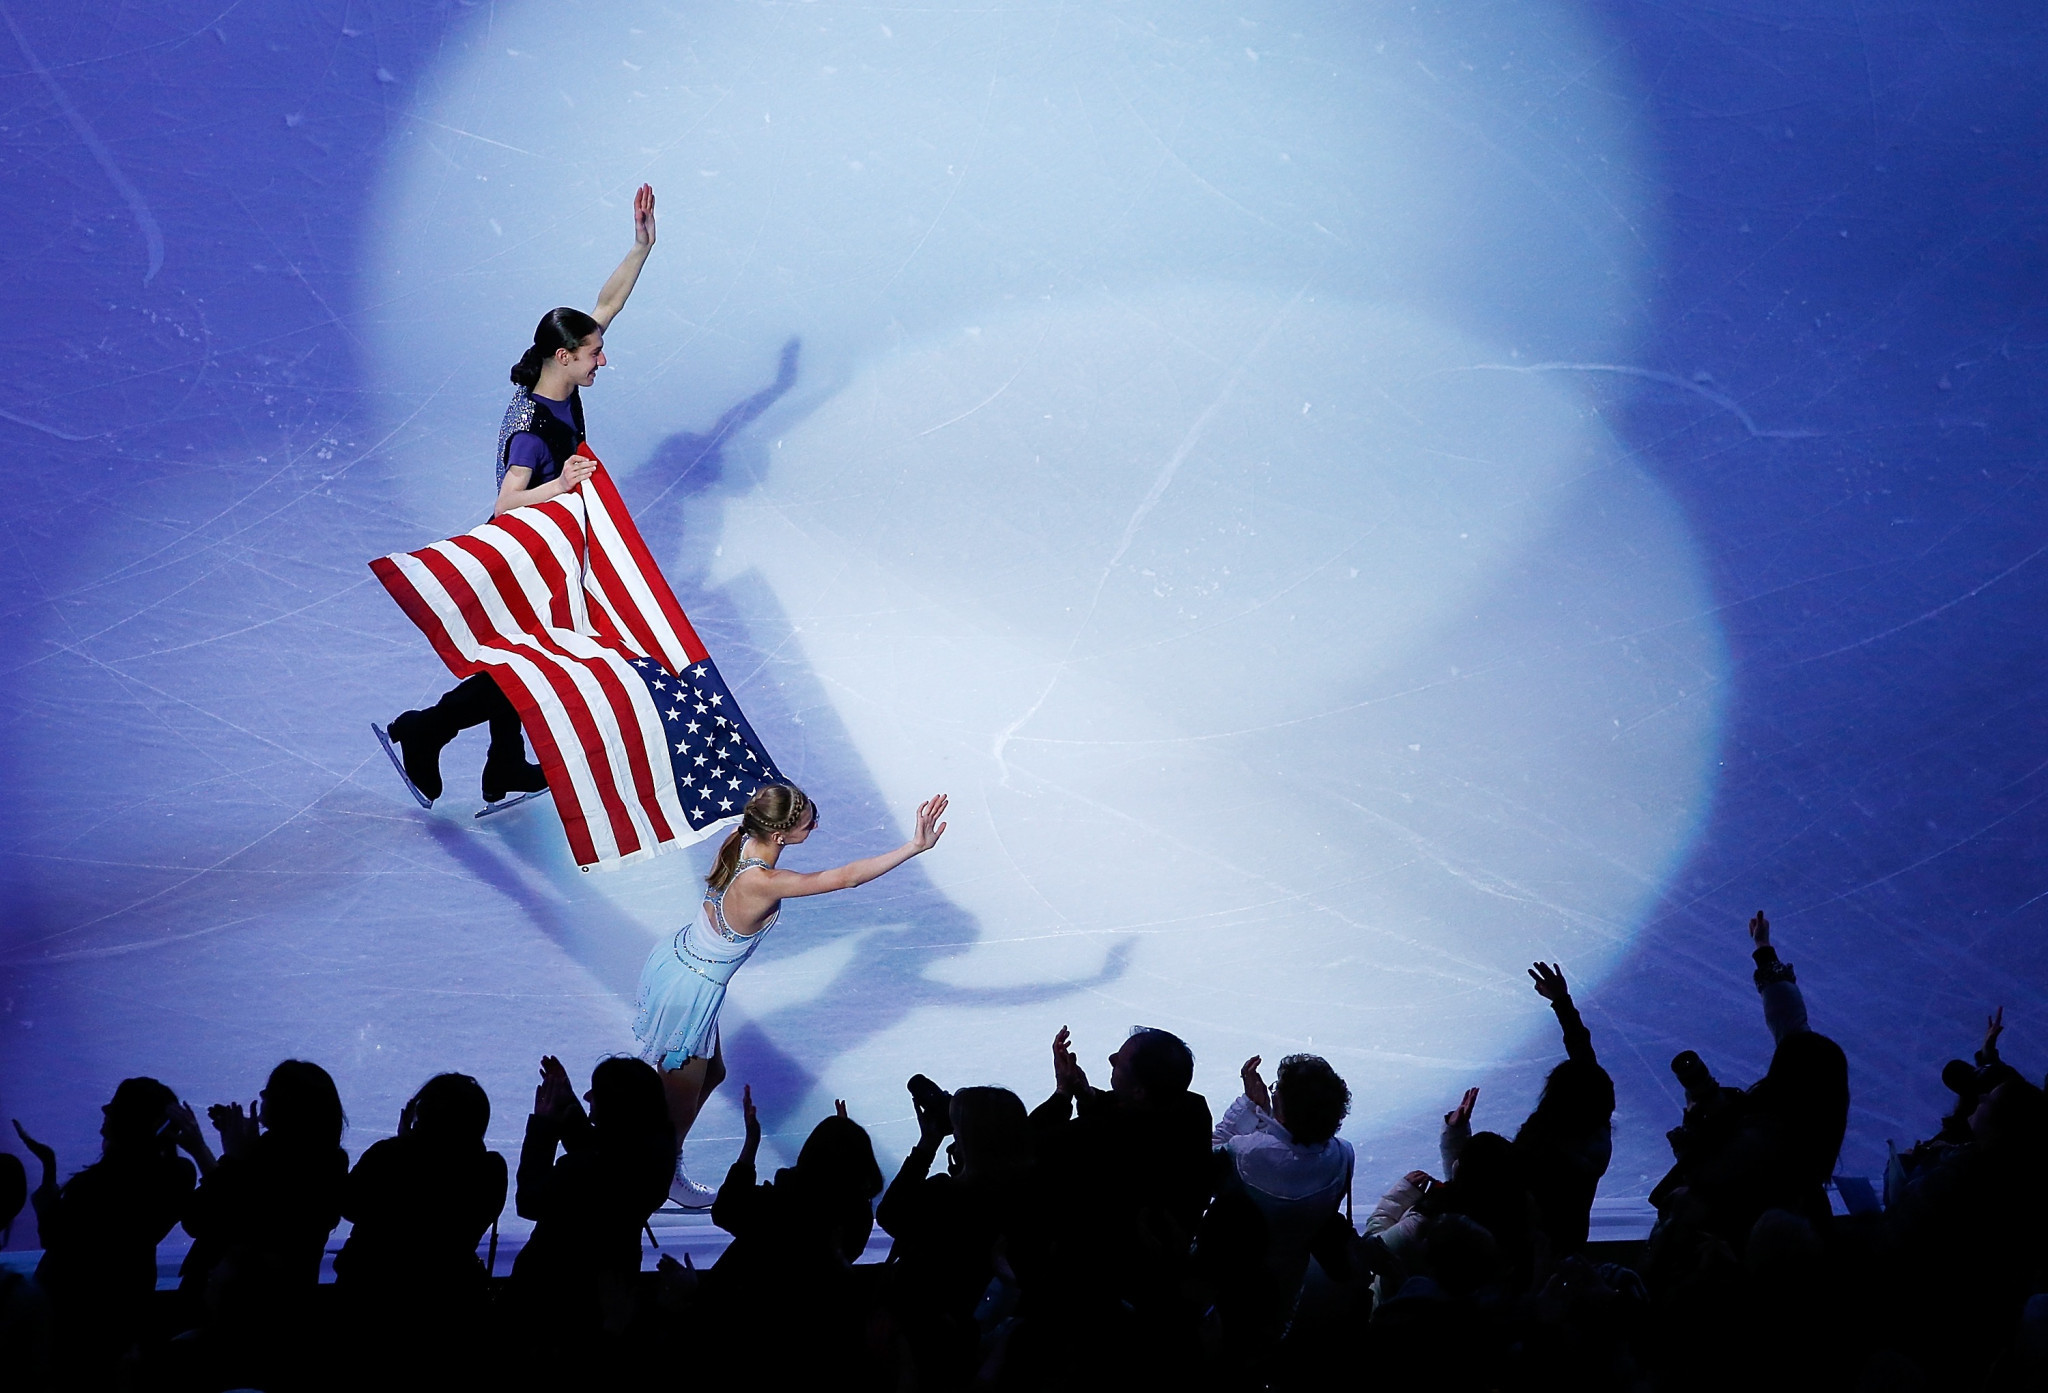 Ramsey Baker was at U.S. Figure Skating for 18 years where he held the roles of chief marketing officer and executive director ©Getty Images